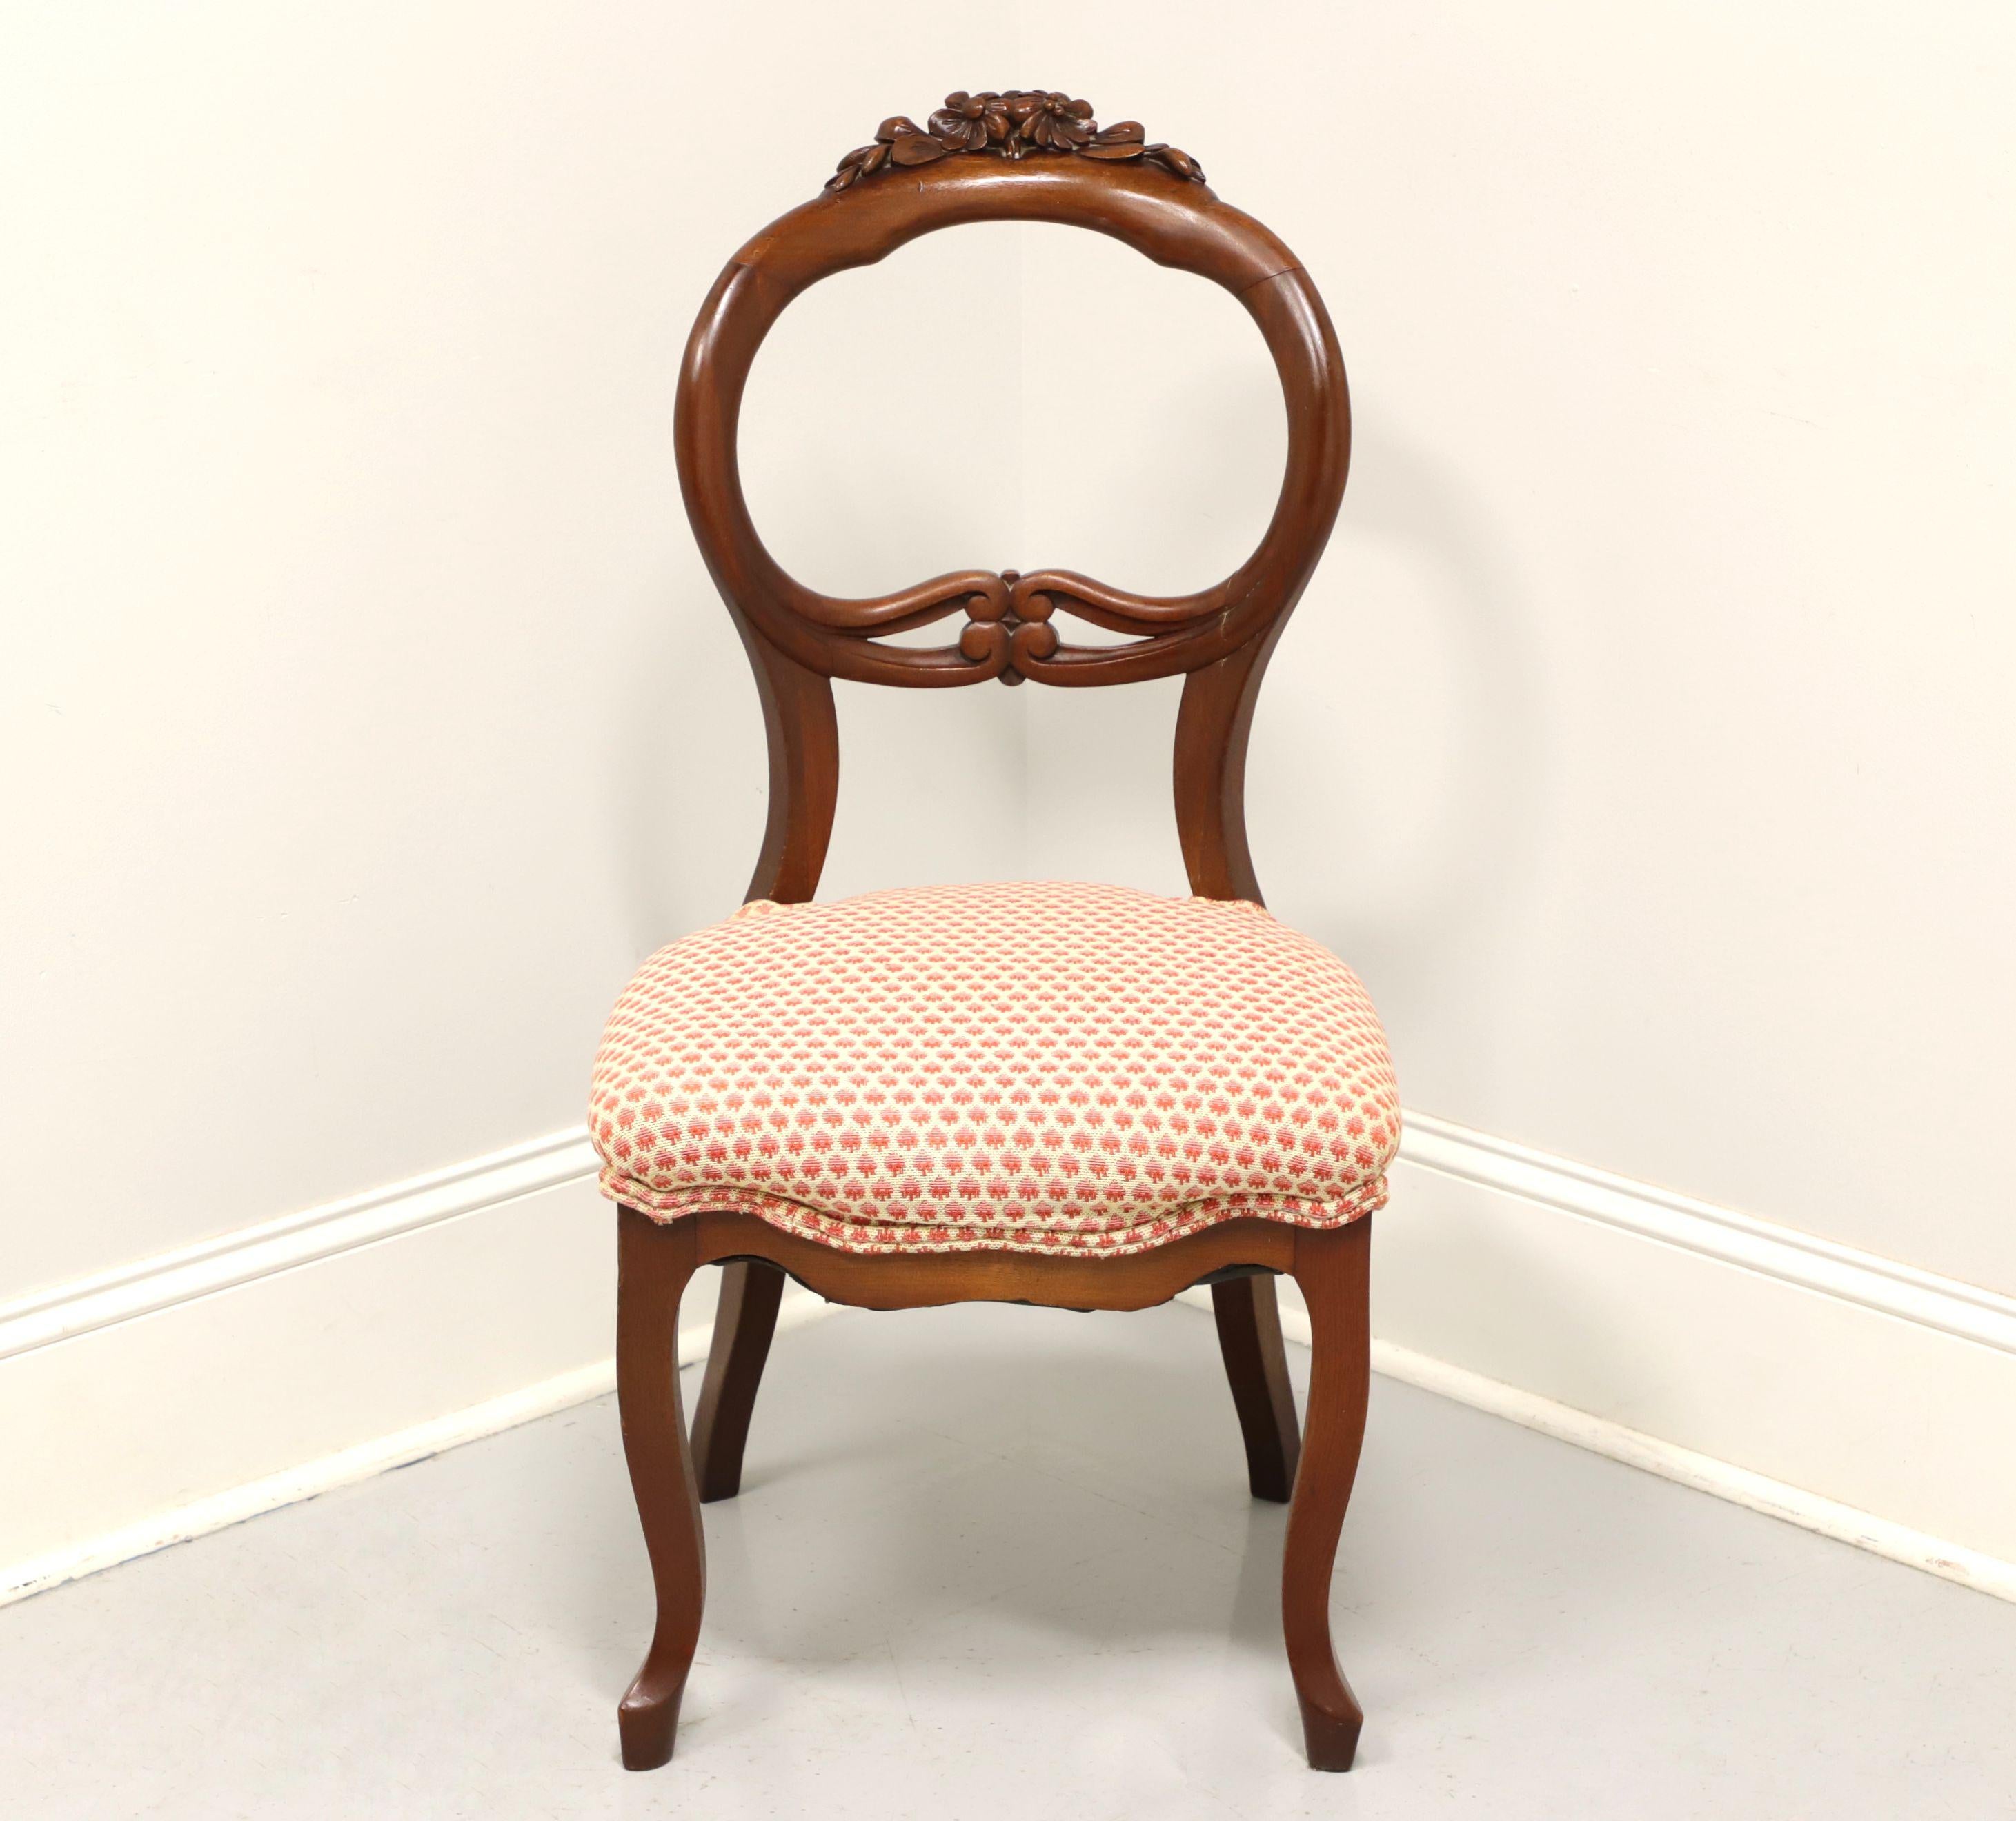 An antique Victorian balloon back side chair, unbranded. Walnut with decorative floral carving to crest rail, carved backrest, salmon colored raised dot fabric upholstered seat and cabriole legs. Likely made in the USA, in the early 20th